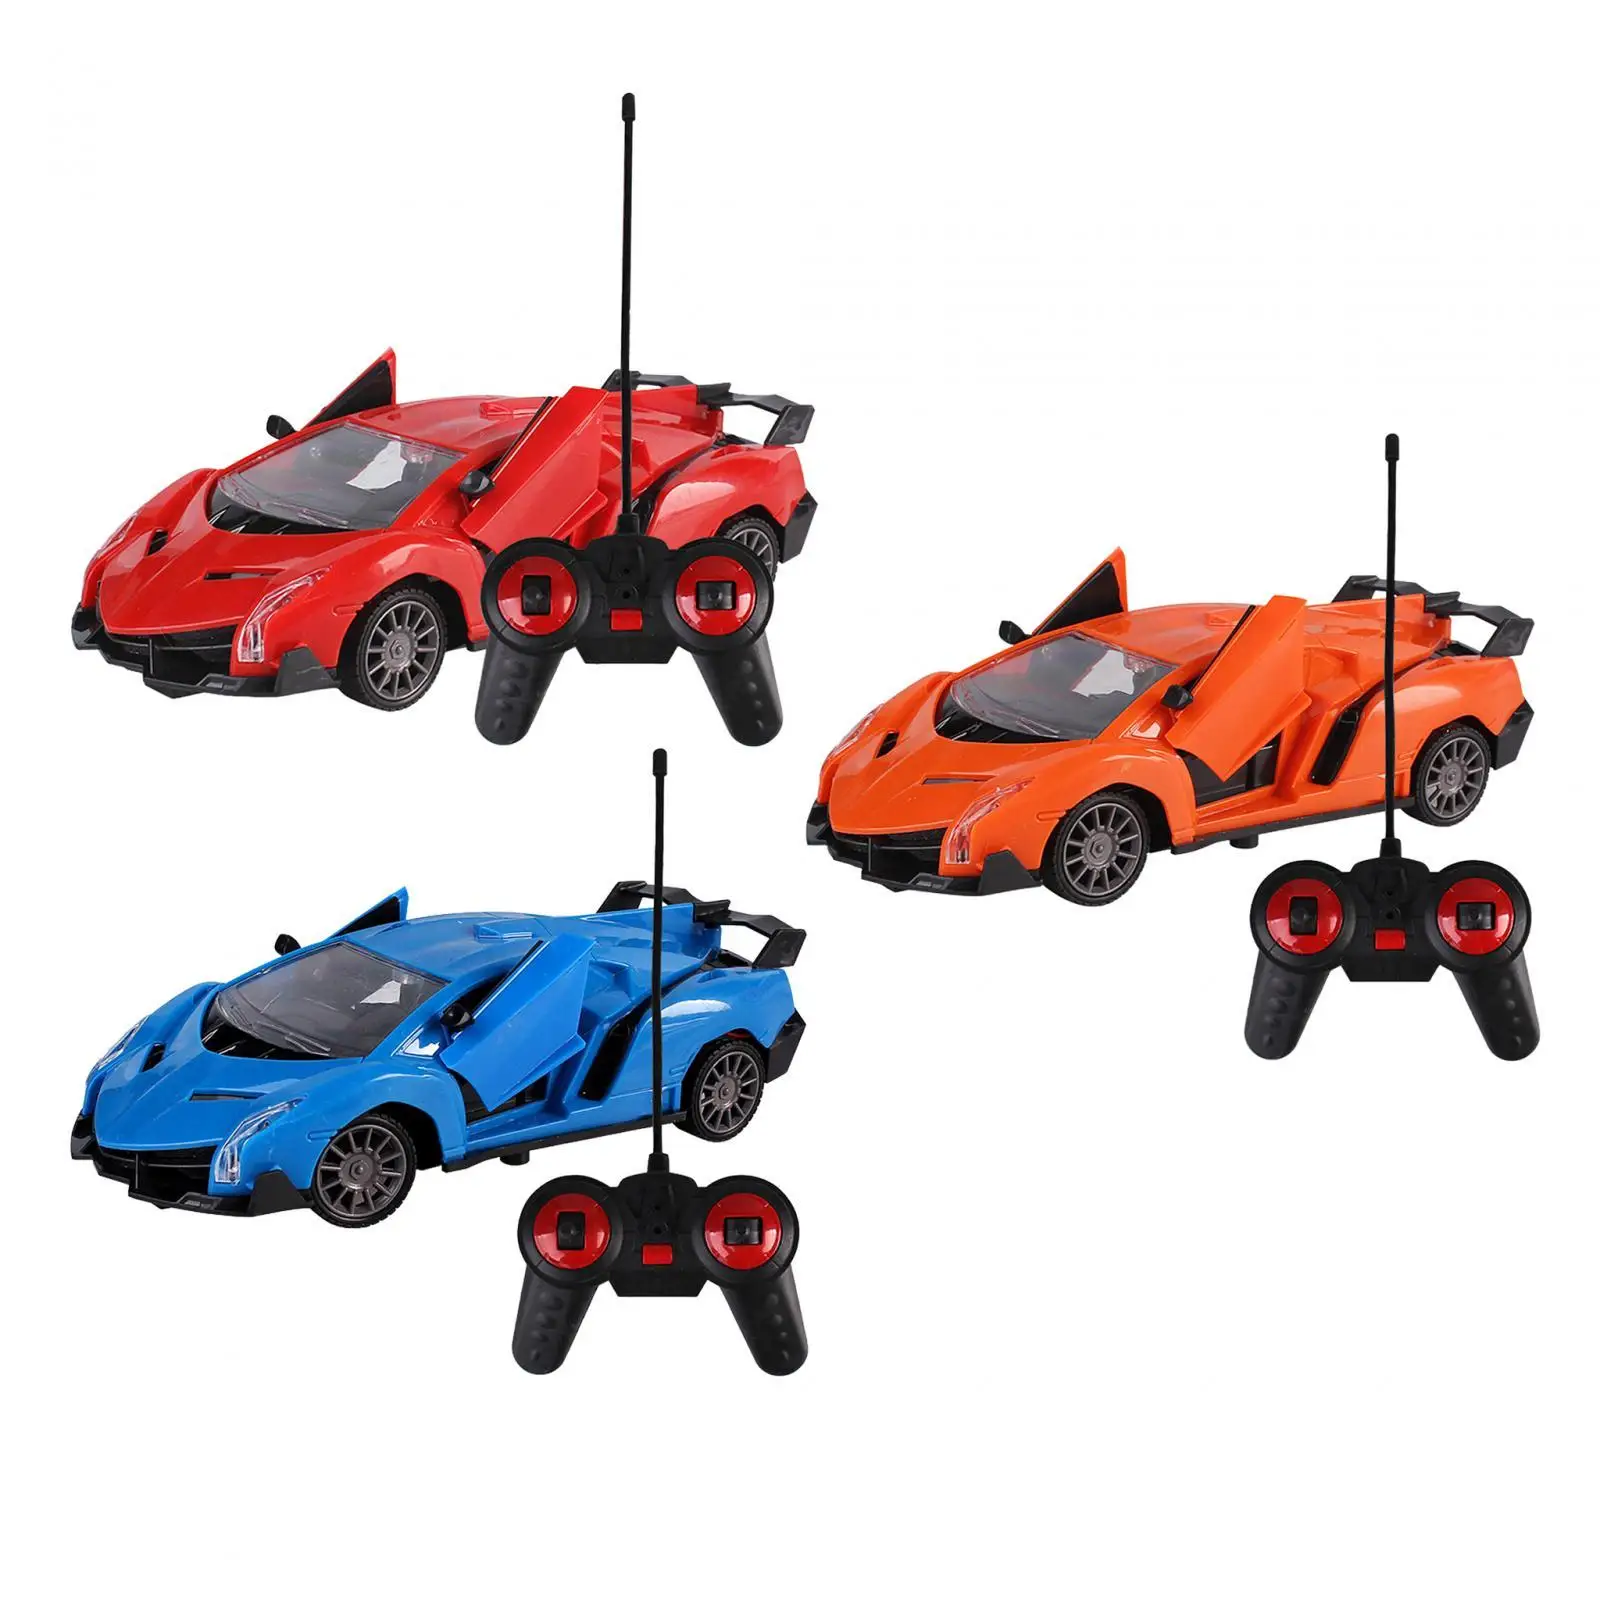 1/24 Remote Control Car Toy sport Hobby Toy for Parks Indoor Streets